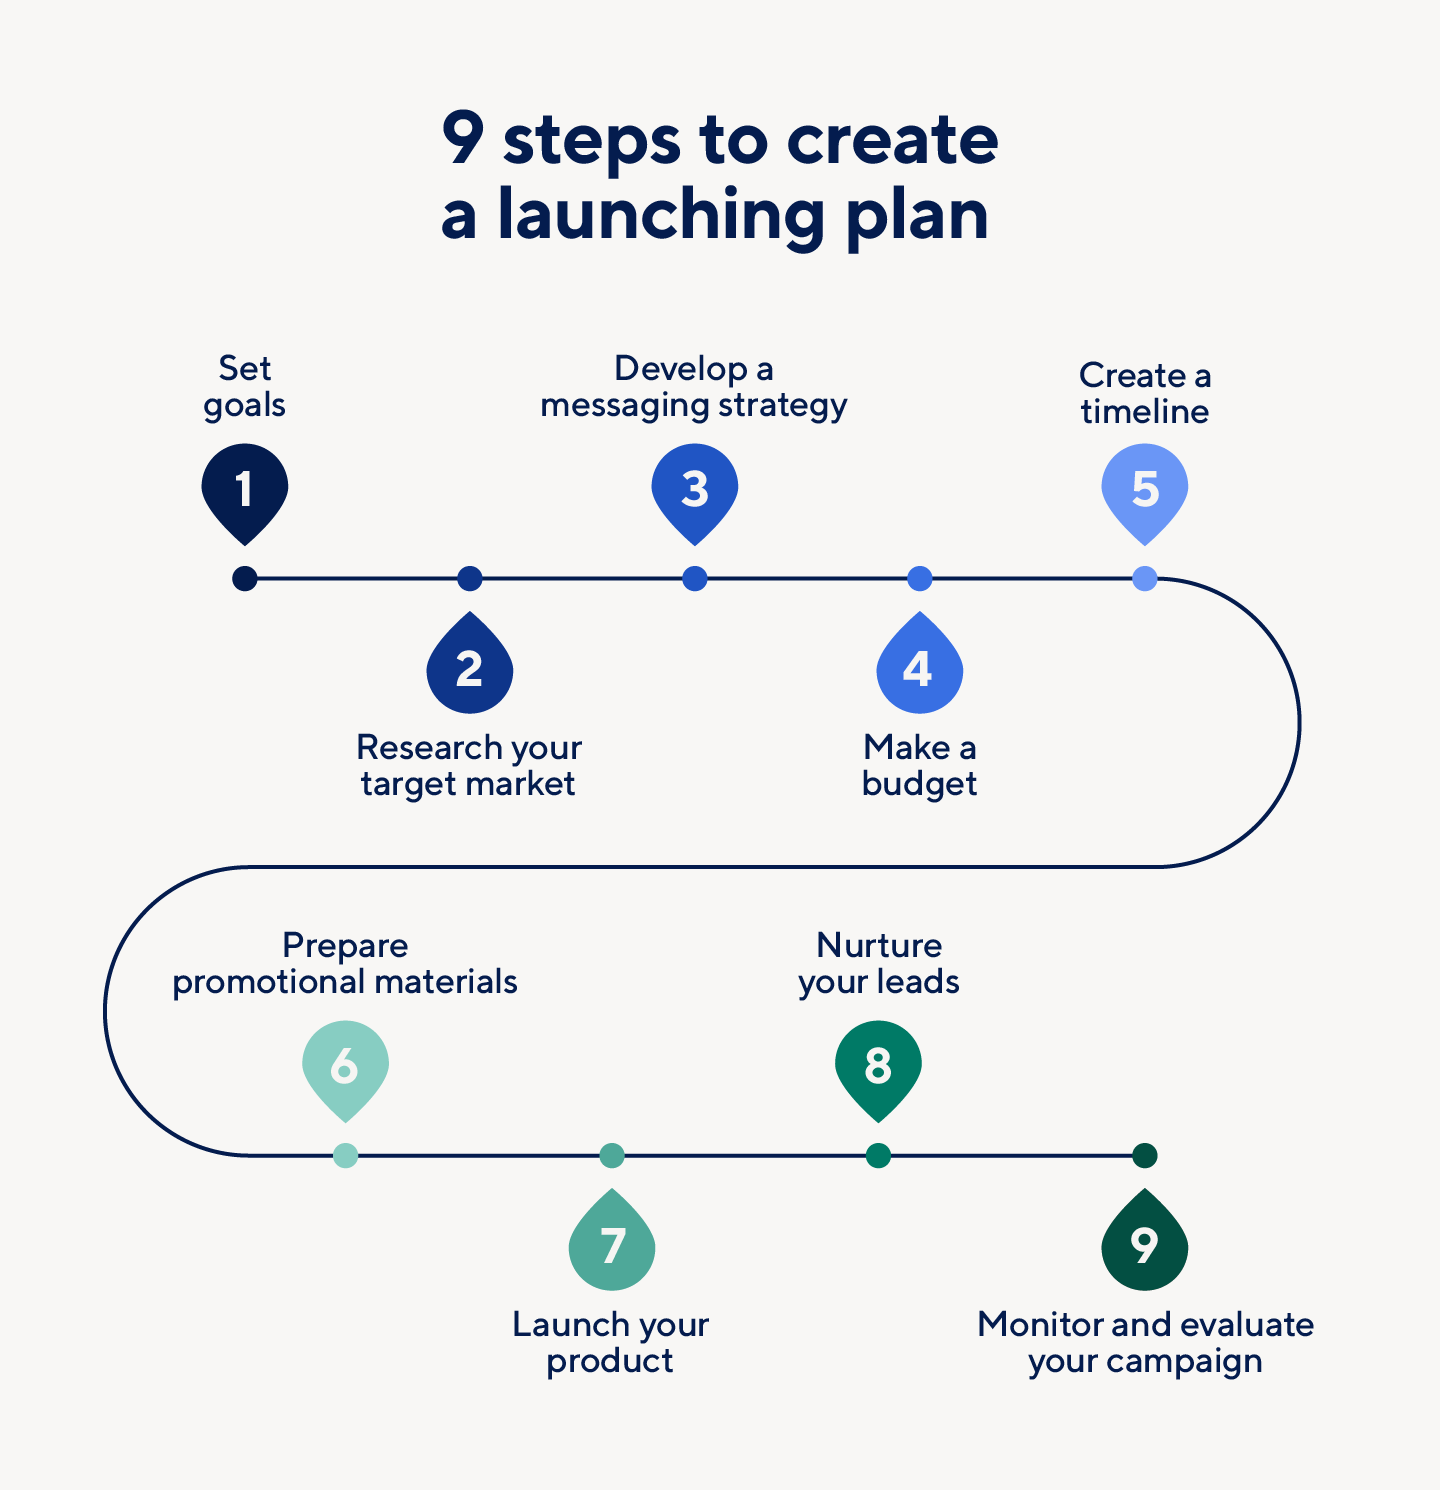 Nine steps to creating a product launching plan.